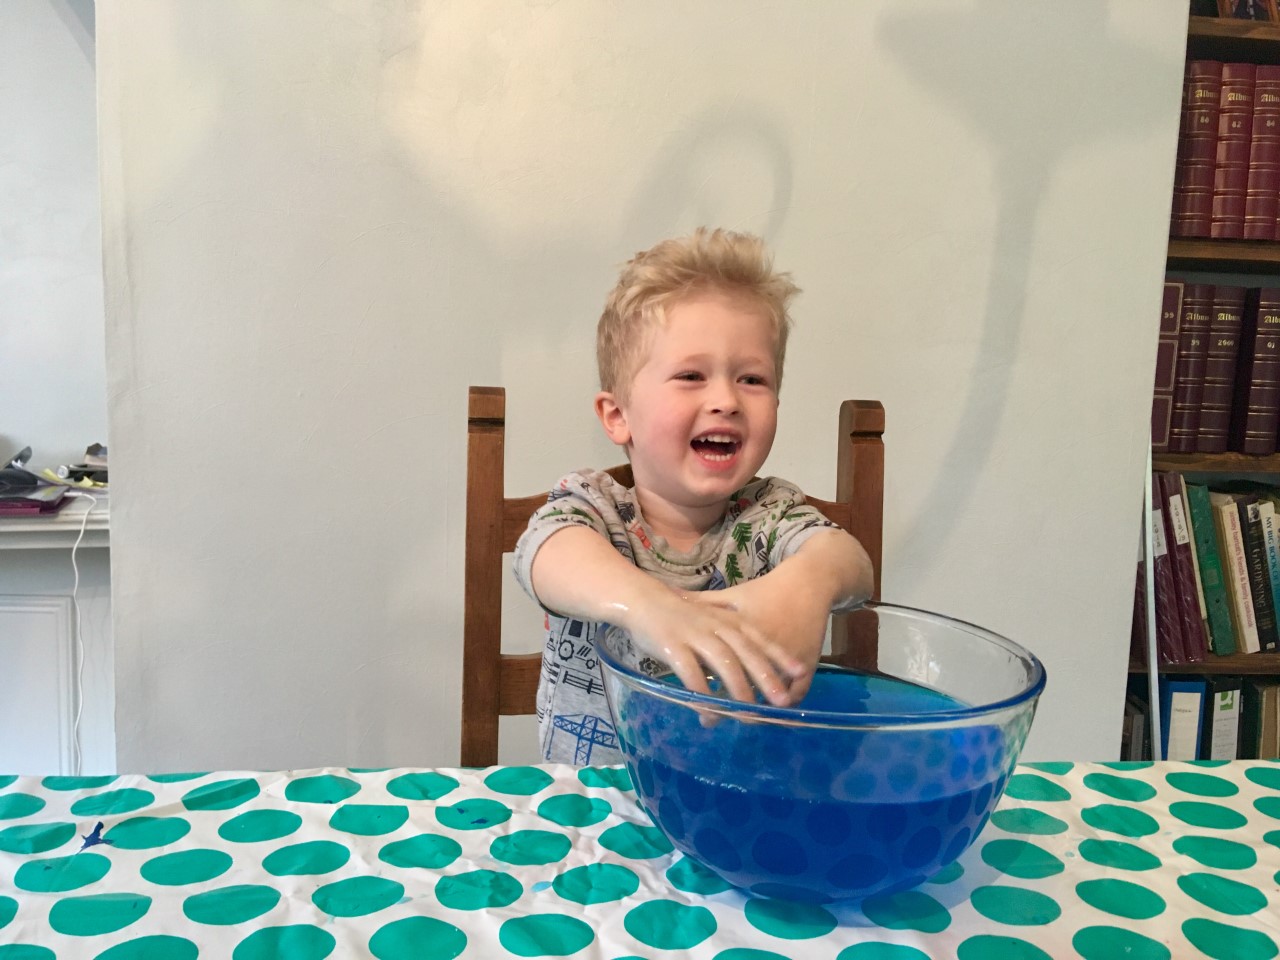 Lucas is sat at table with his hands in a big bowl of blue slime